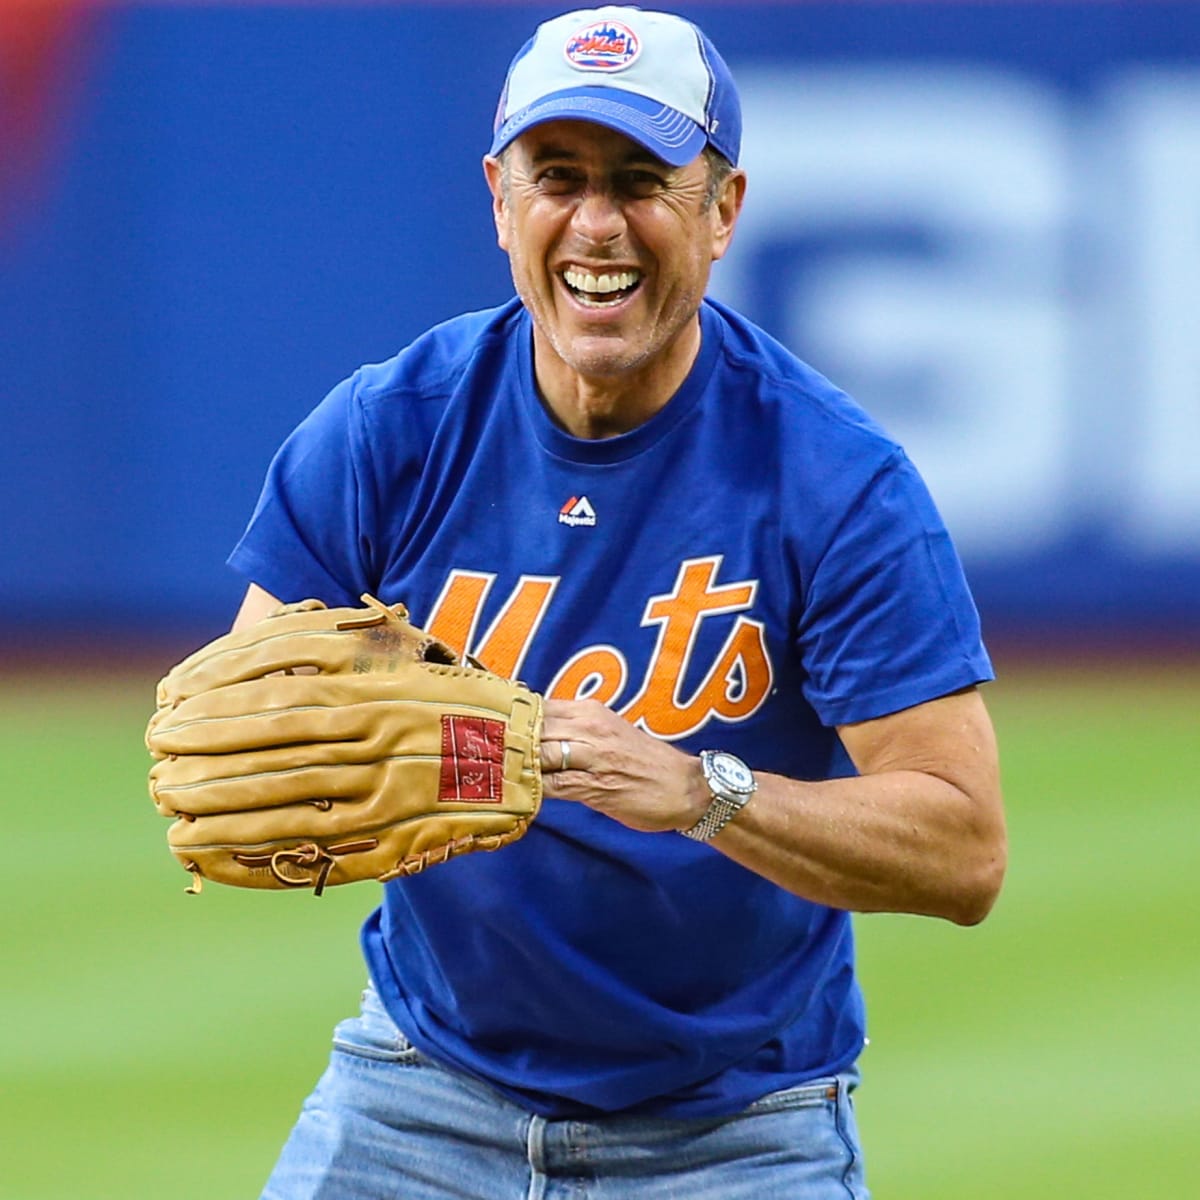 15 Hilarious New York Baseball Moments Featured on 'Seinfeld